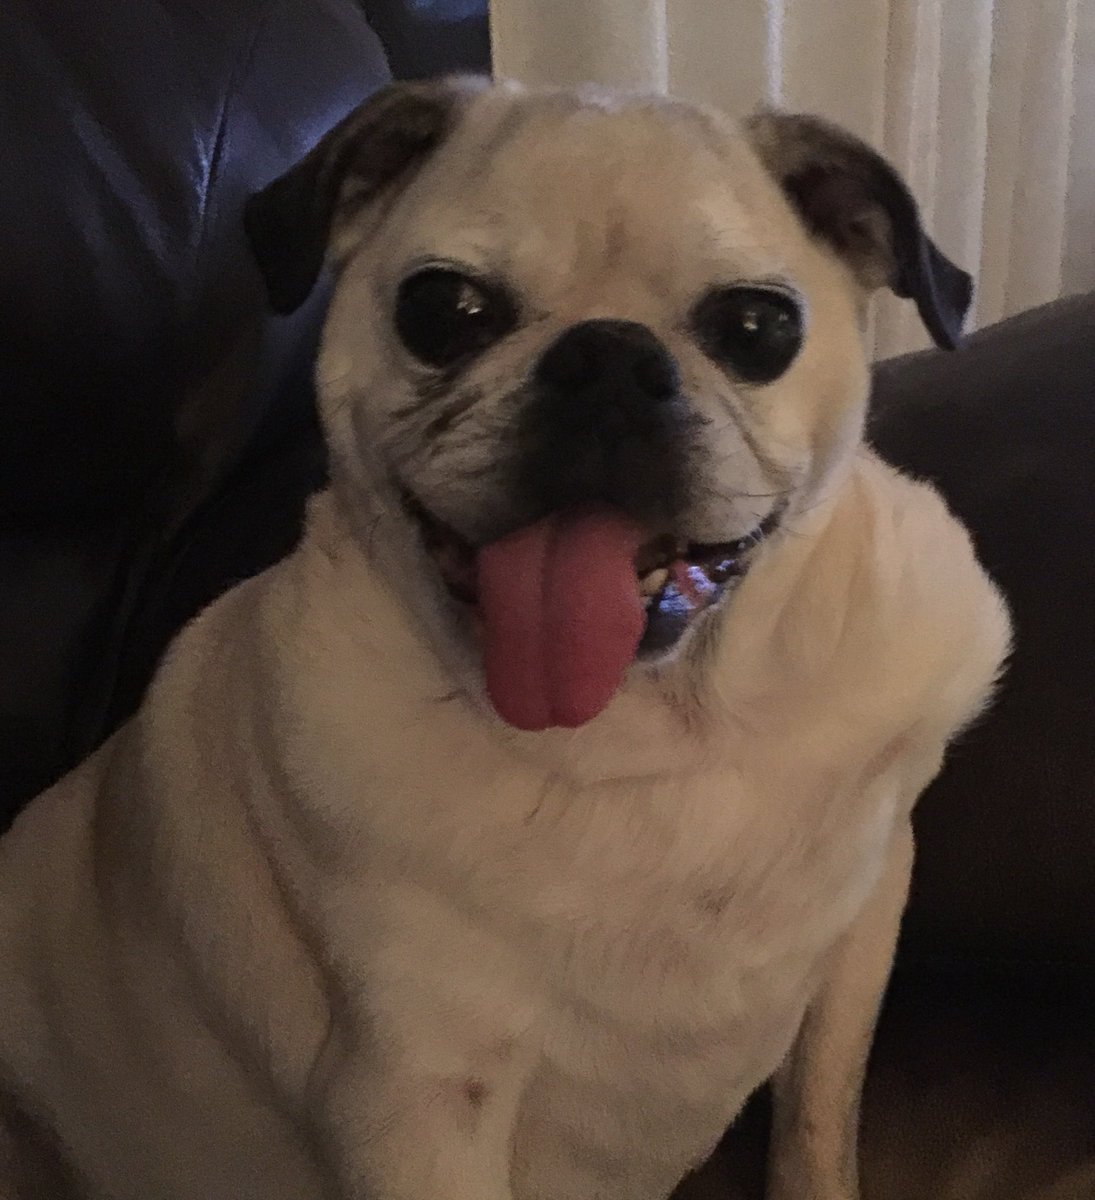 It's never too late for #tot #tongueouttuesday #tongue #tongueouteveryday #pugaholic #dontshopadopt #pugster #nddog #gipper #seniordog